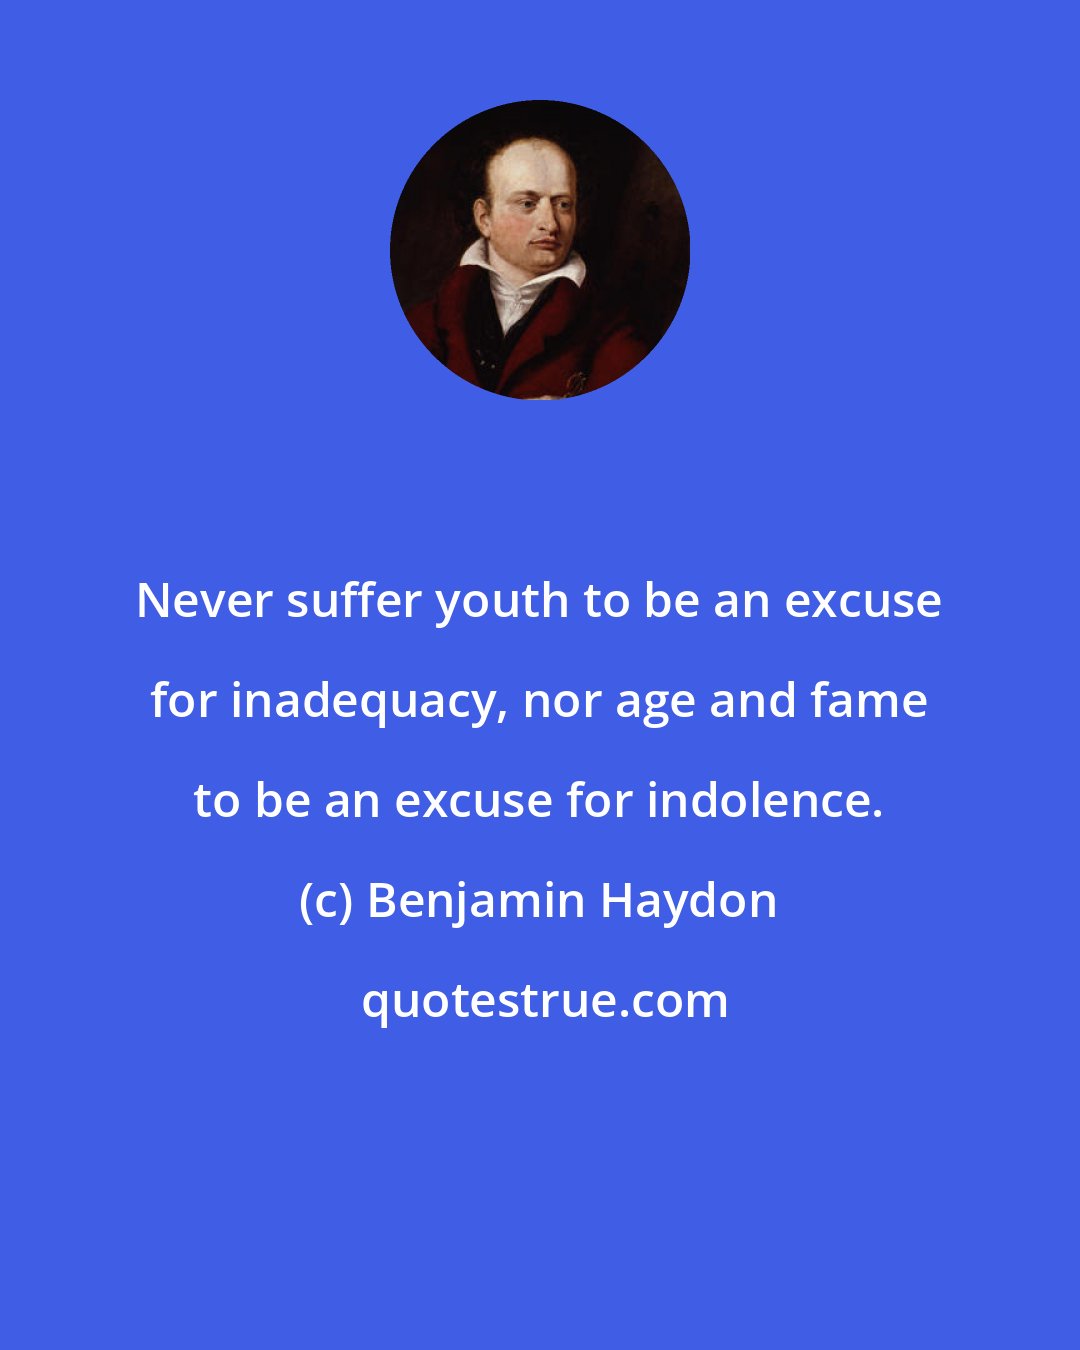 Benjamin Haydon: Never suffer youth to be an excuse for inadequacy, nor age and fame to be an excuse for indolence.